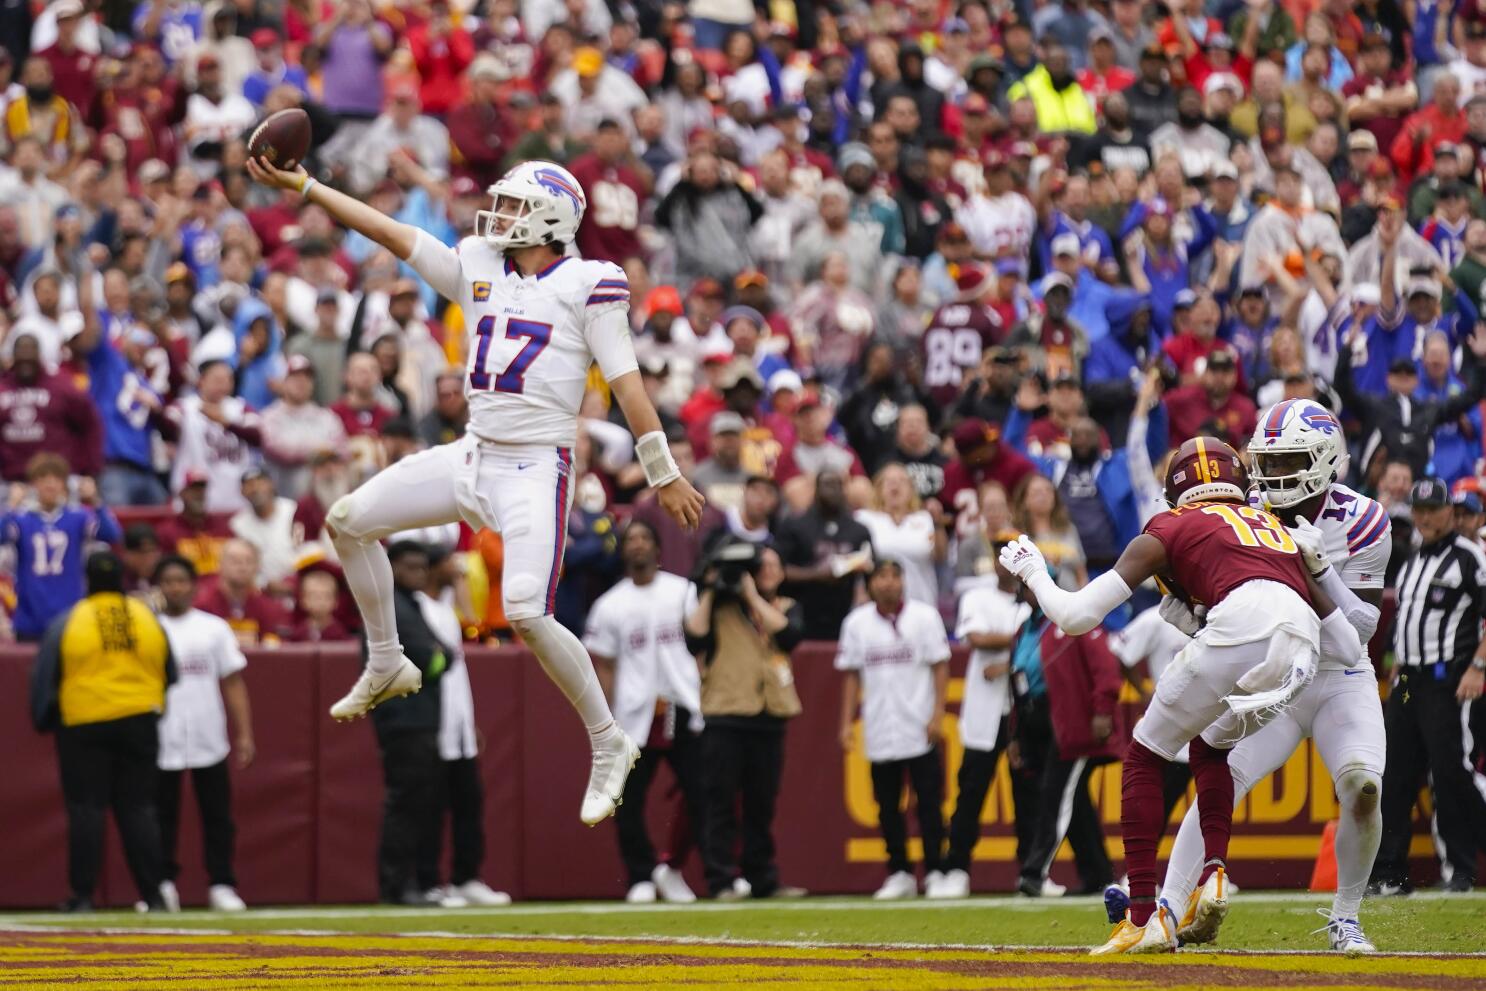 Scouting Report: Bills' Josh Allen has shined on the big stage in